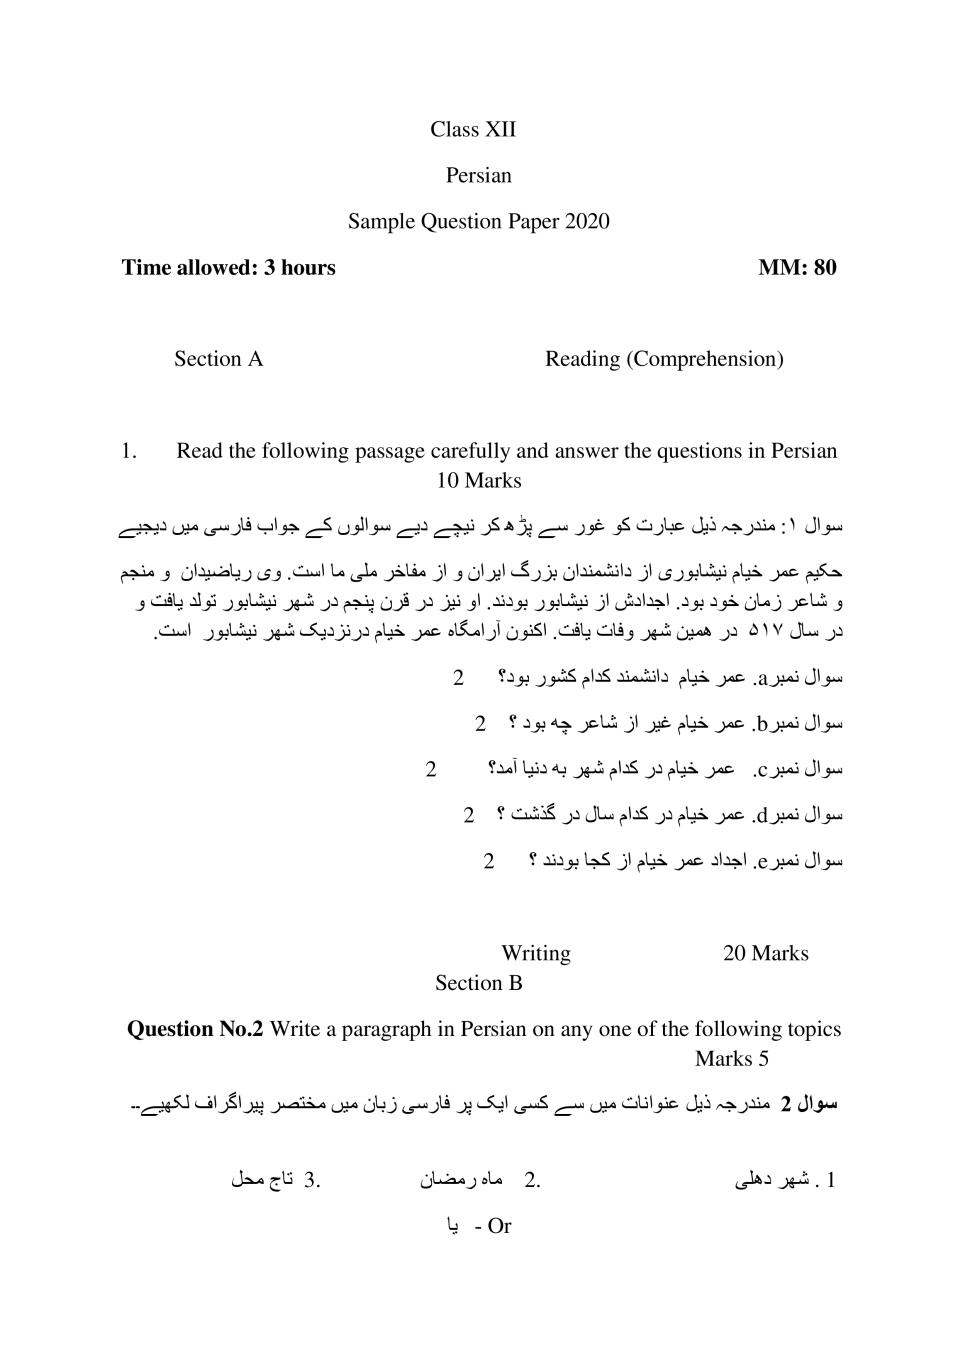 CBSE Class 12 Sample Paper 2020 for Persian - Page 1